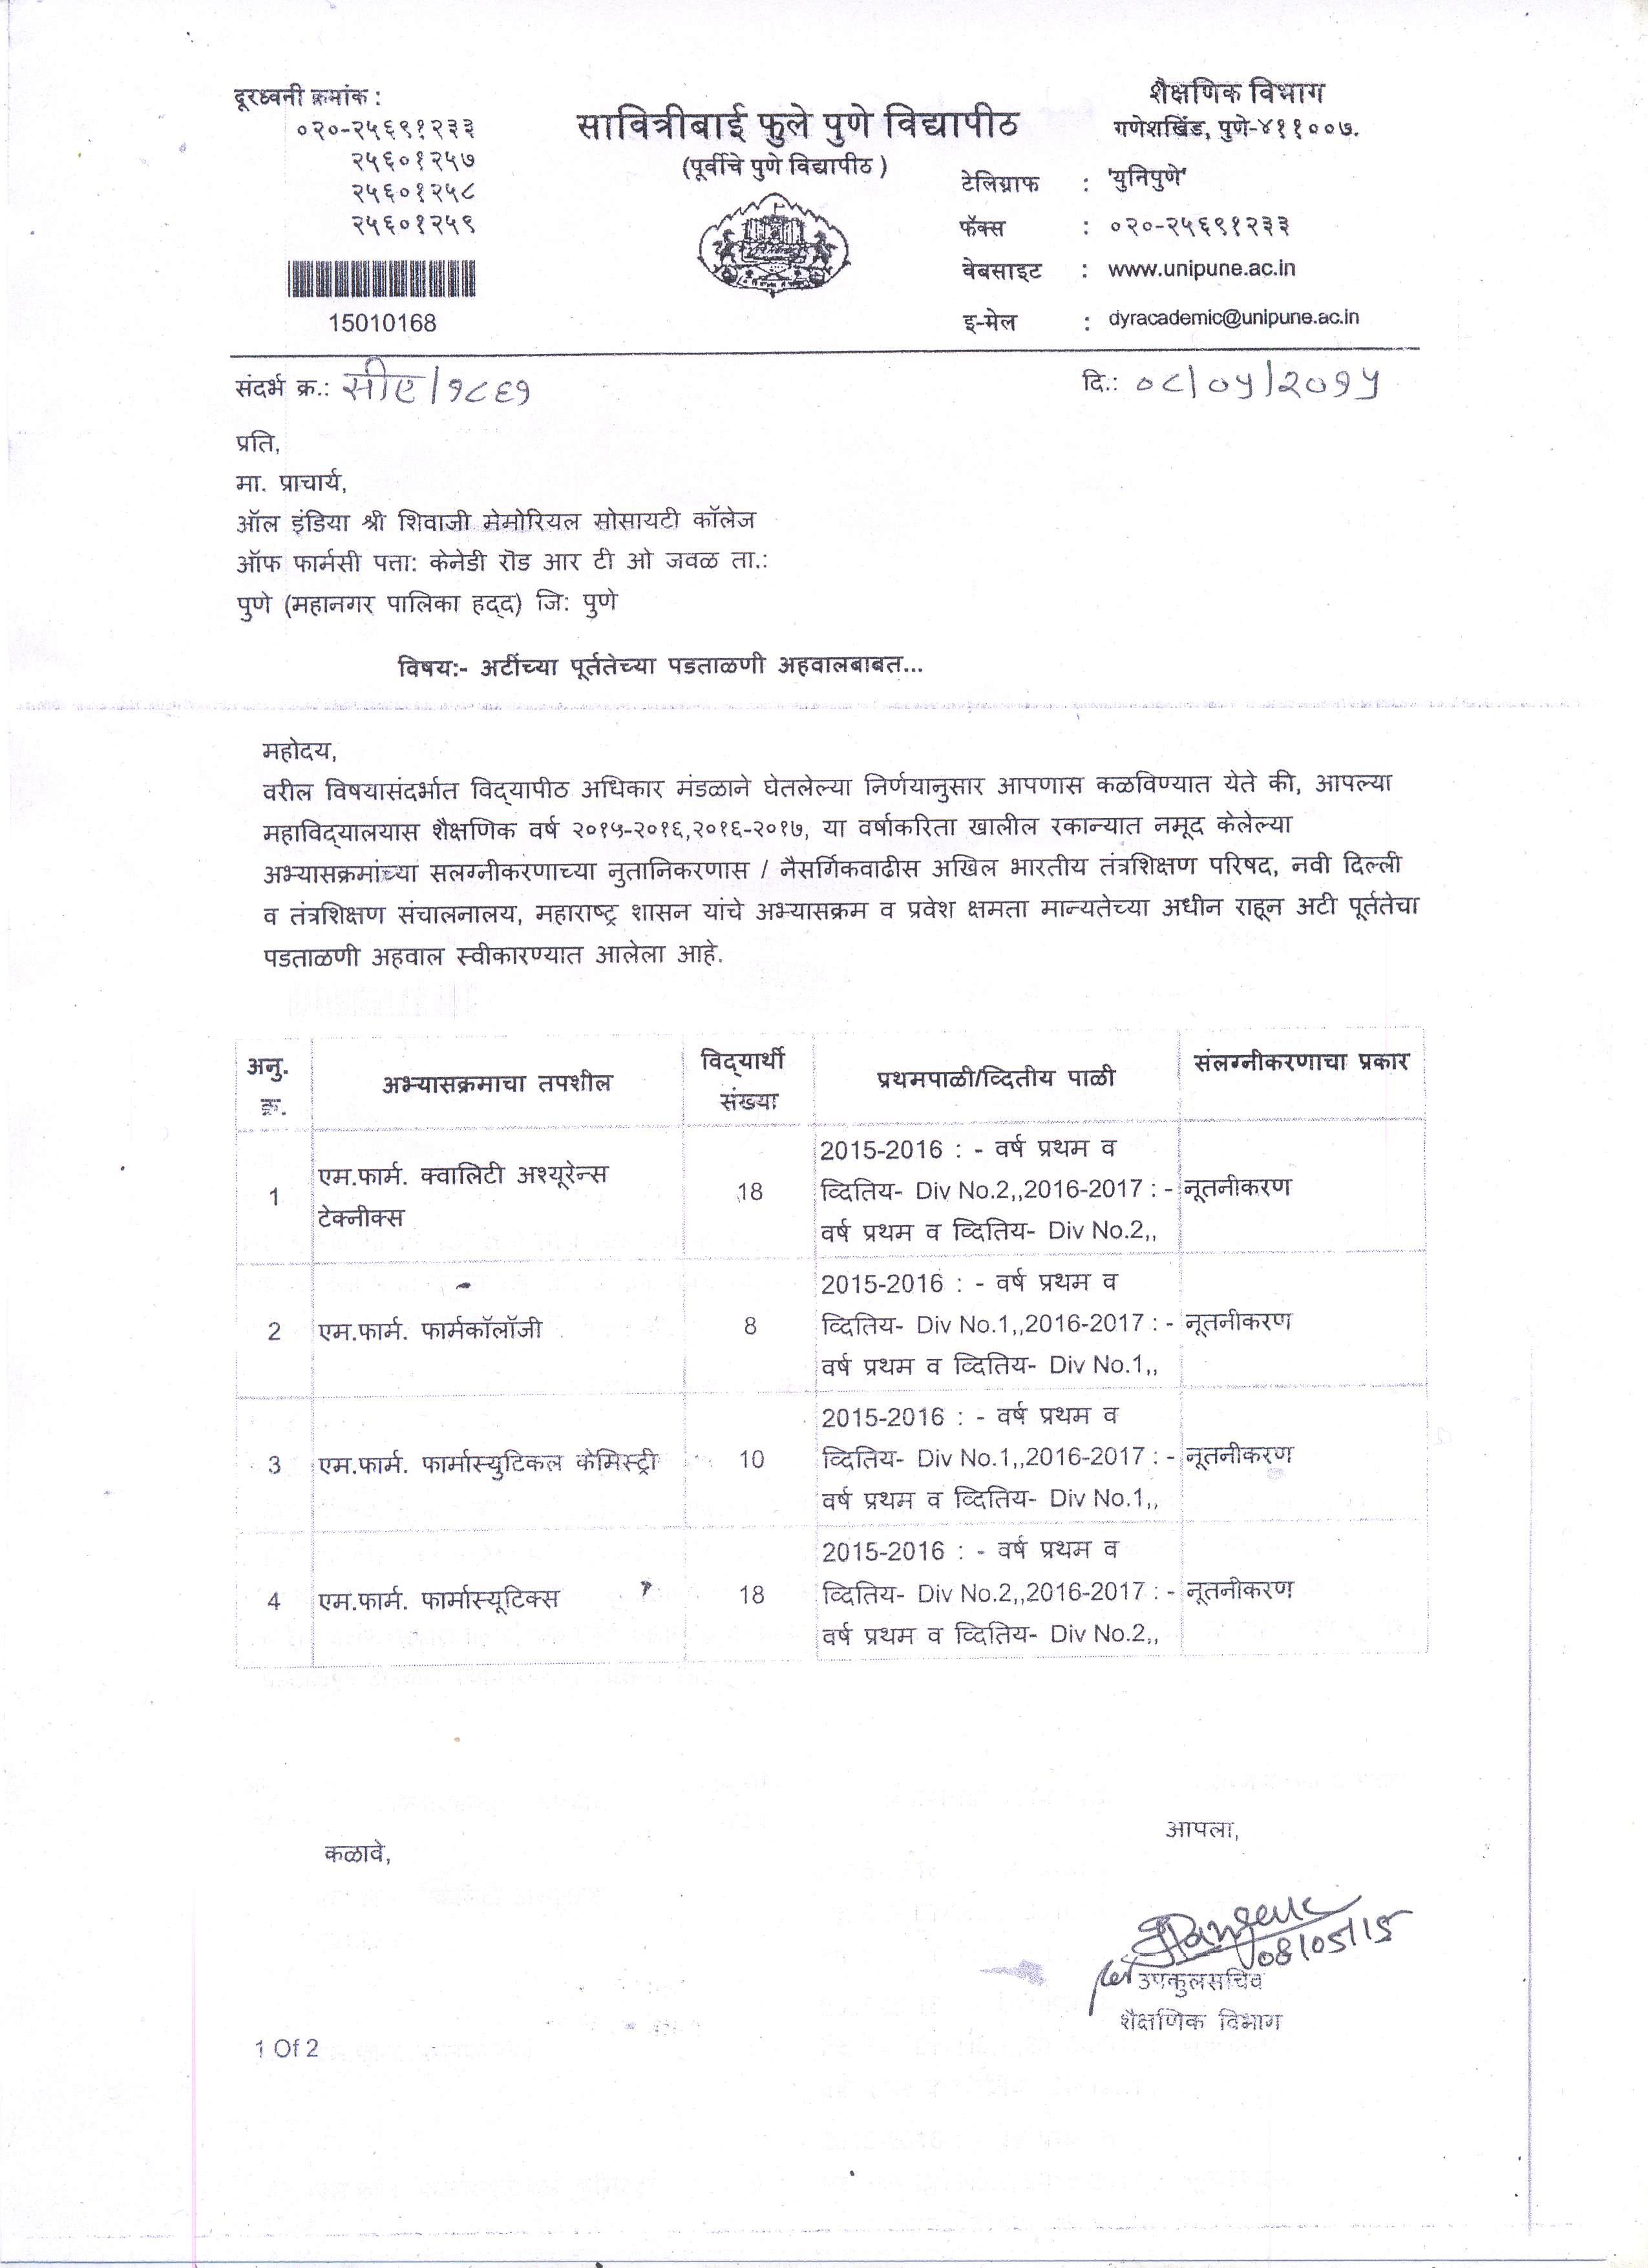 Affiliation letter One of the best pharmacy college in Pune